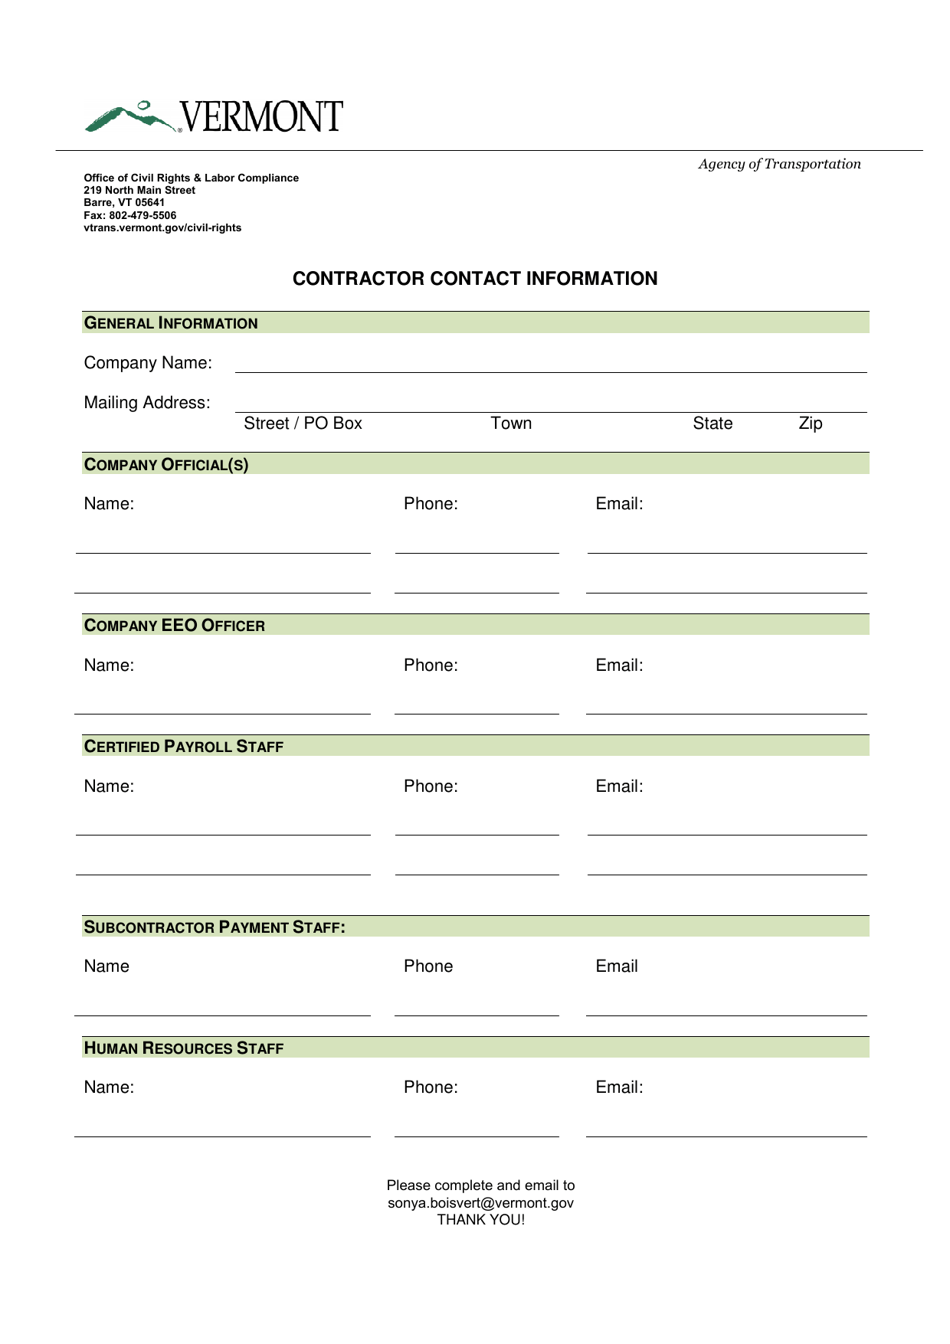 Contractor Contact Information - Vermont, Page 1